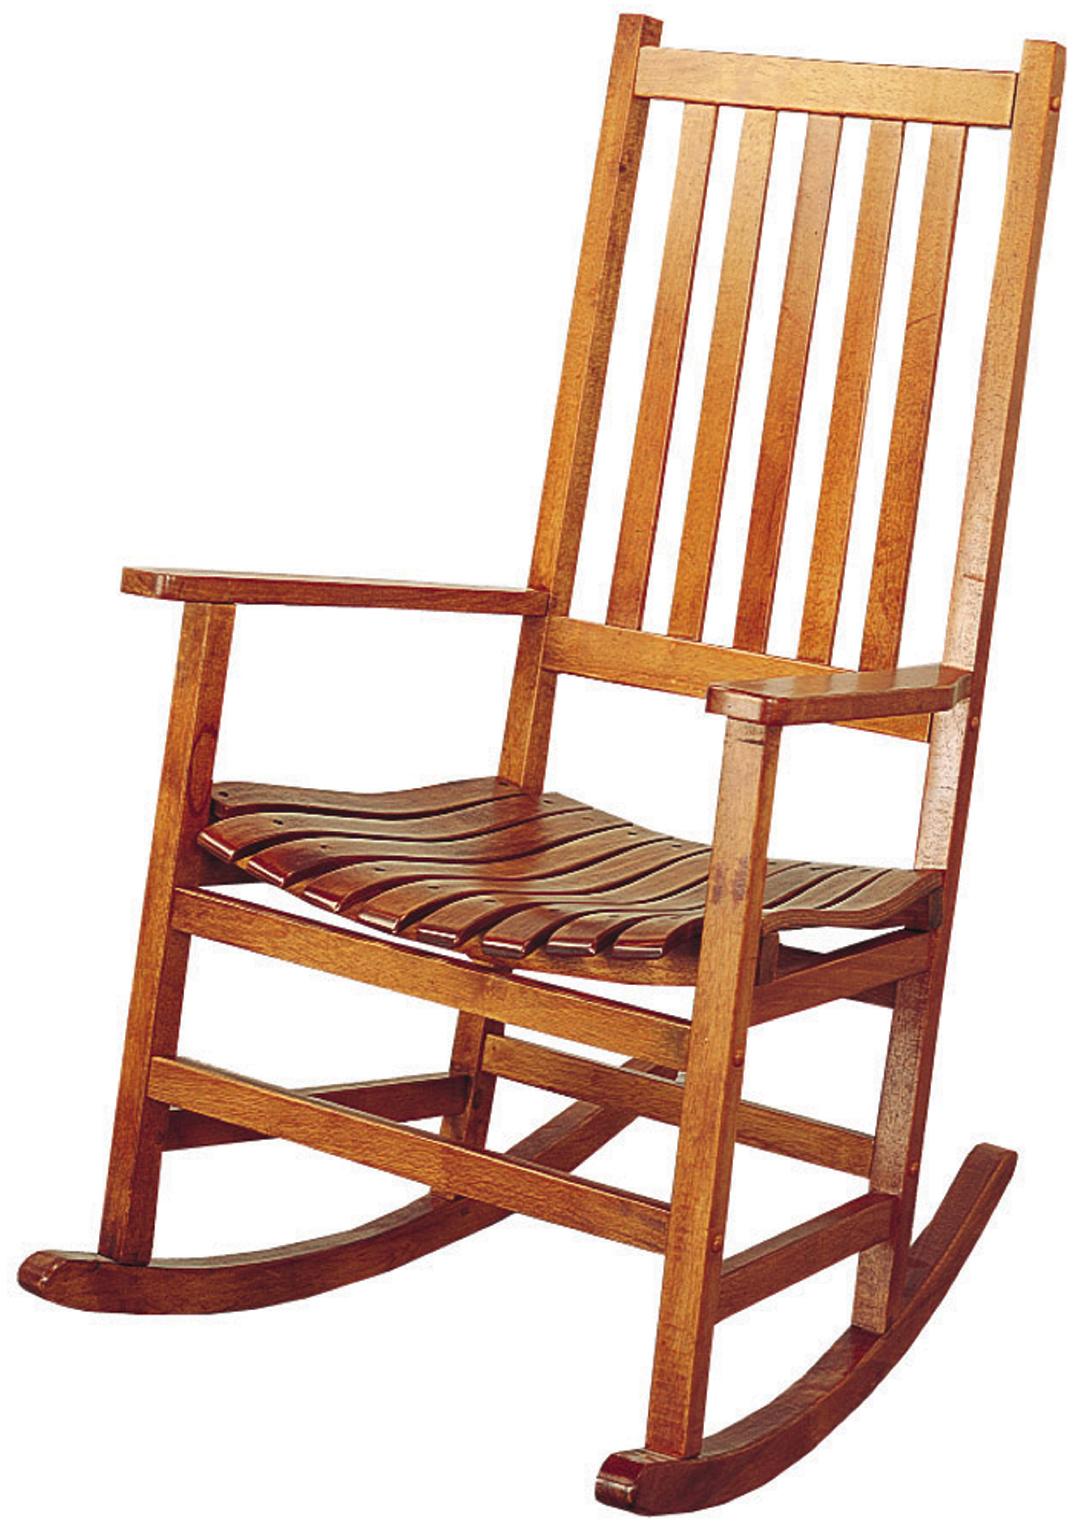 Sweater Rocking Chair. $159.00 Coaster Co.